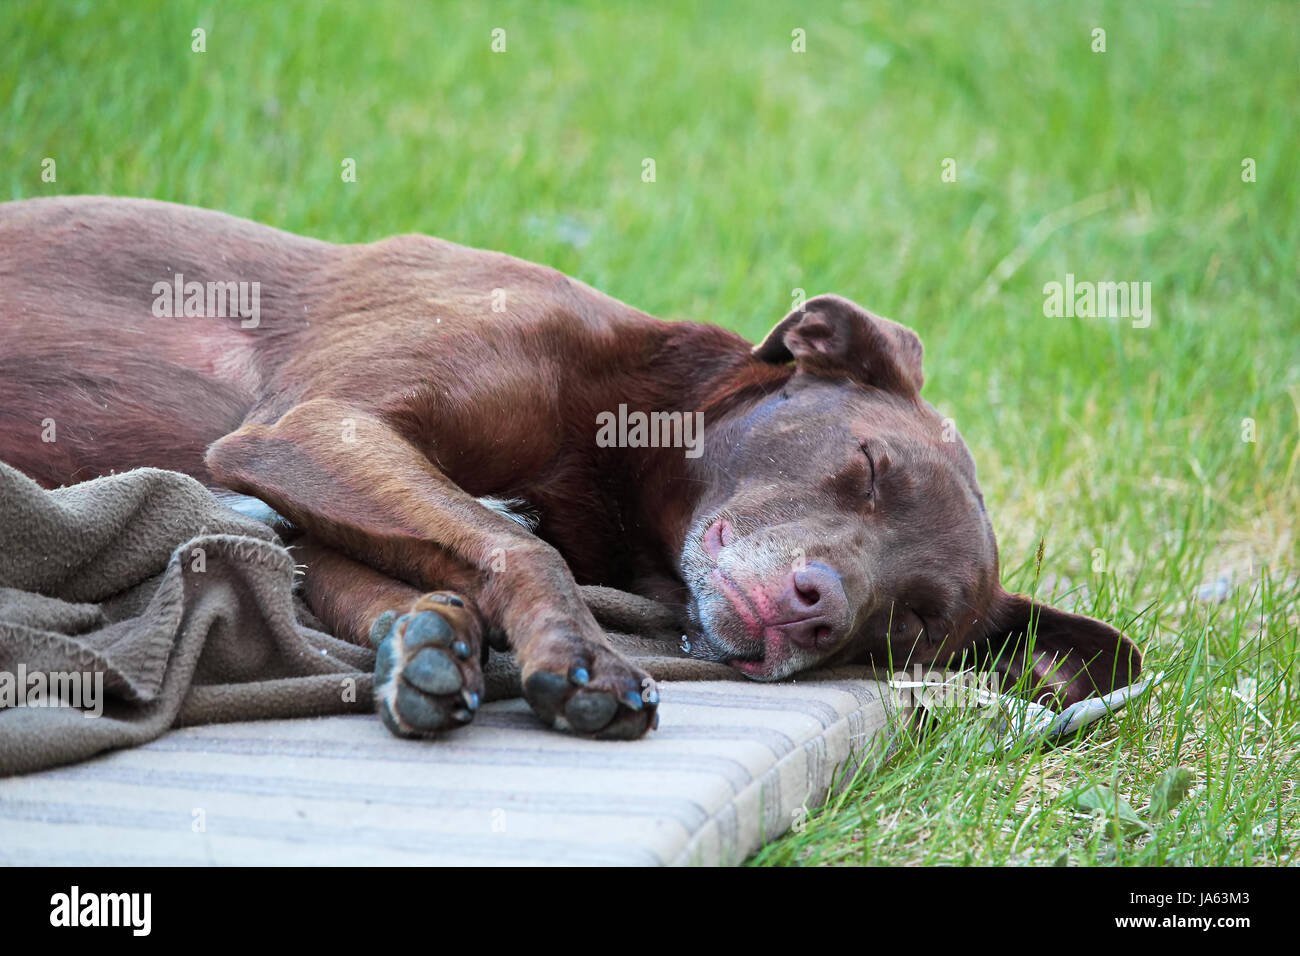 Exhausted dog lying down on a mat. Stock Photo